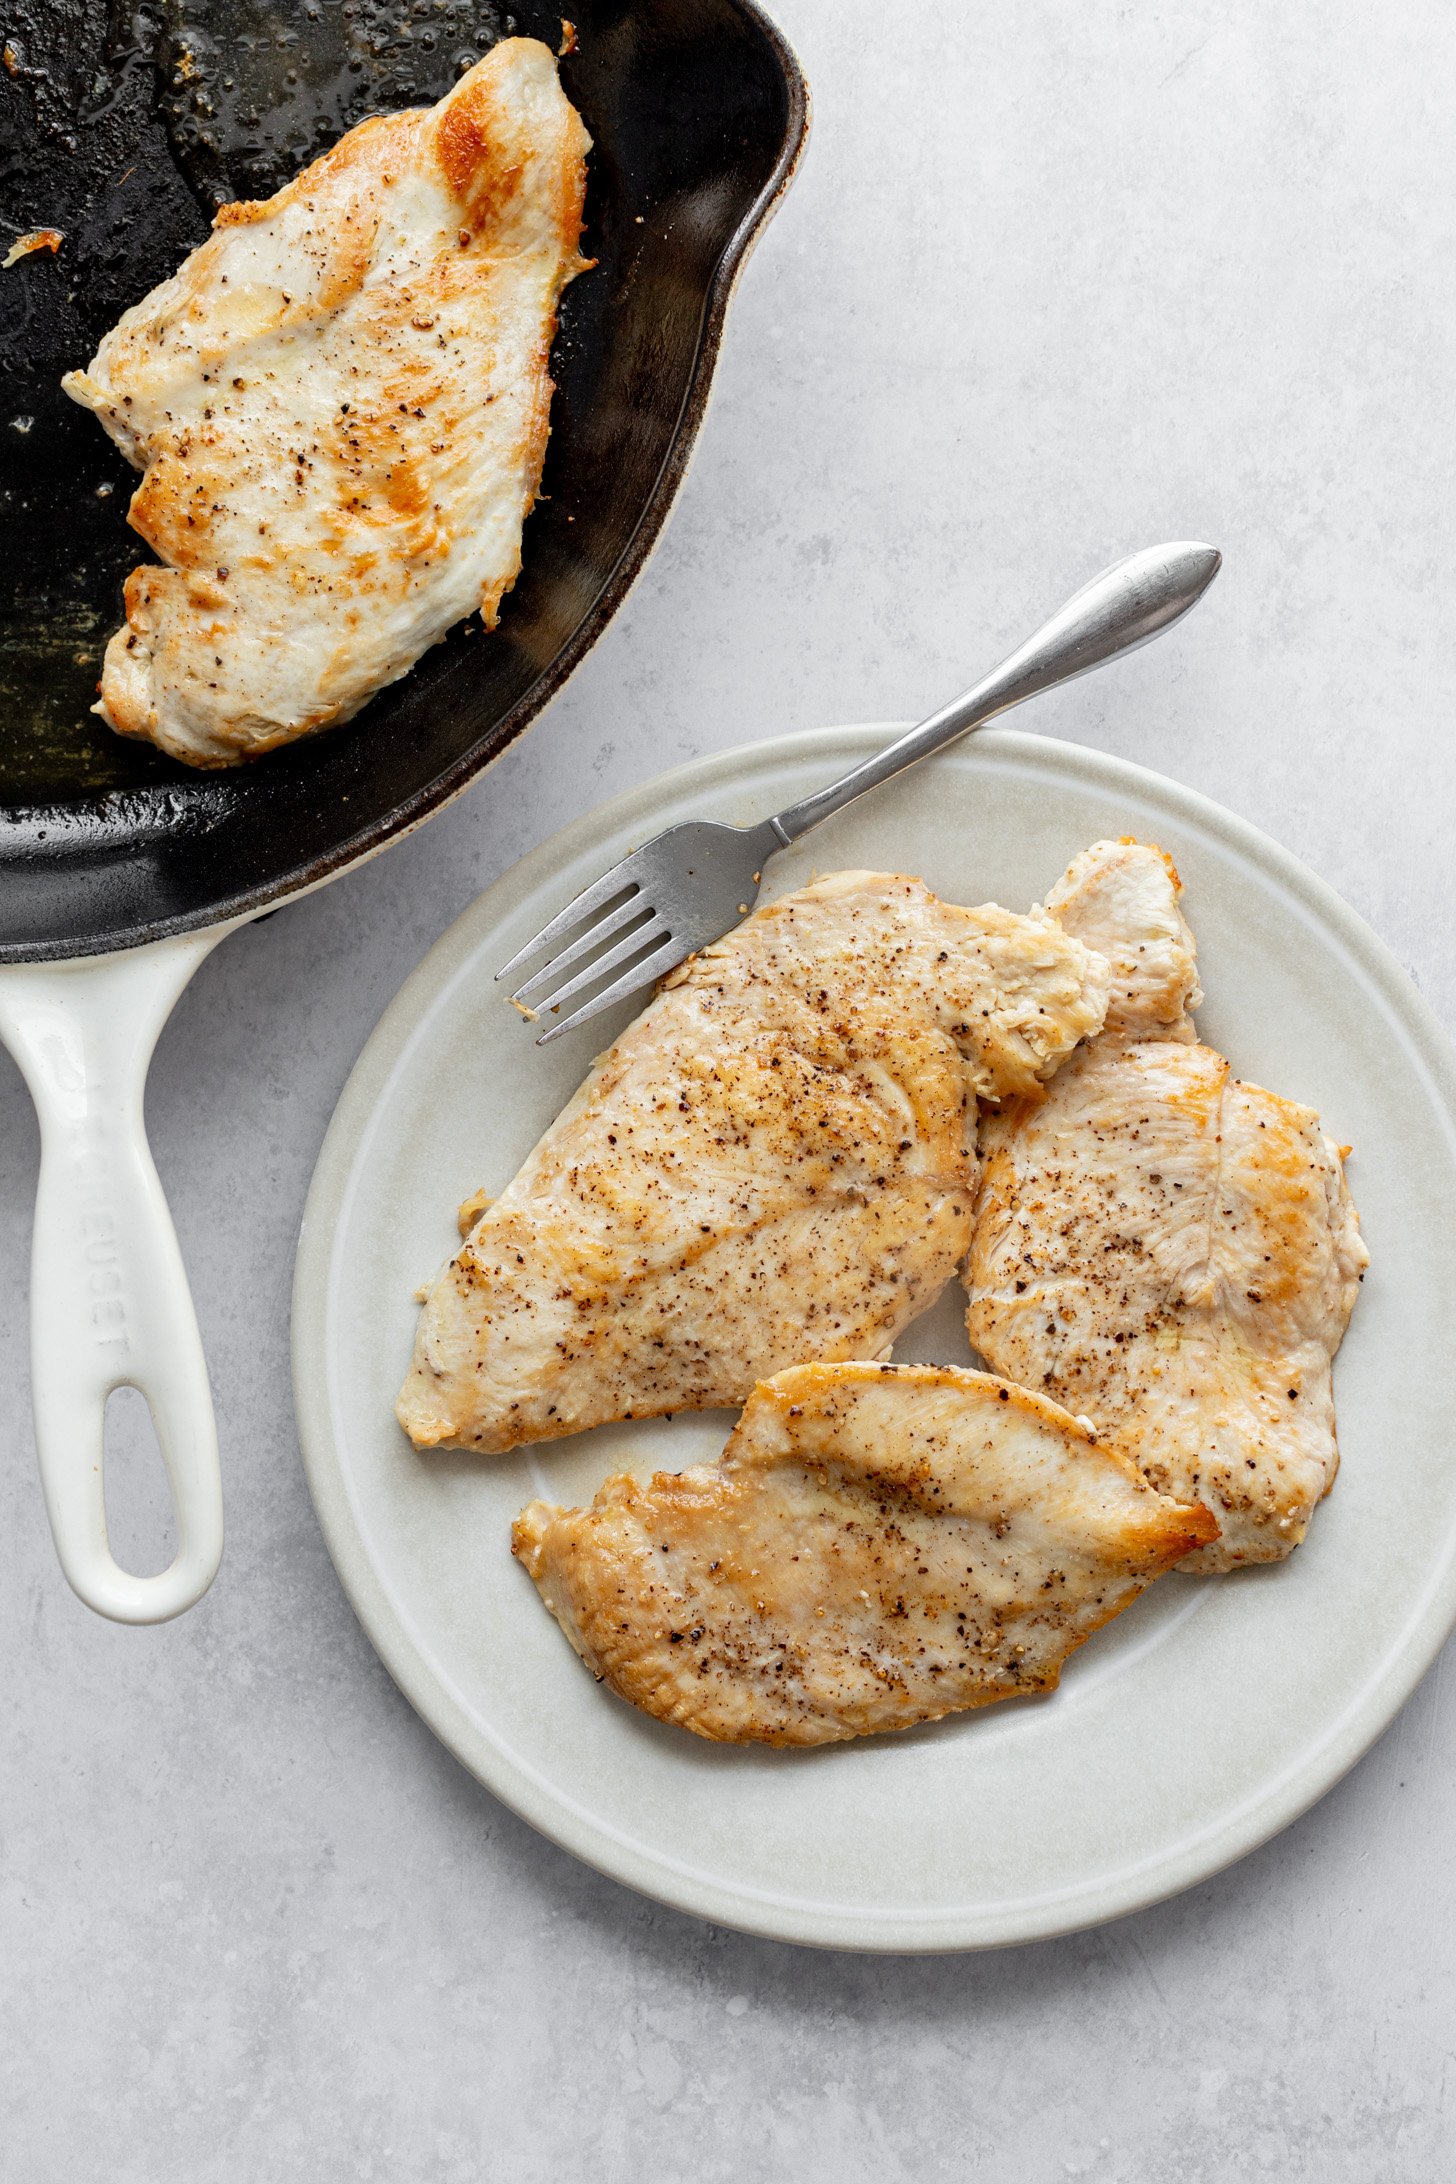 A cast iron skllet with a piece of cooked, seasoned chicken breast is sitting next to a plate filled with 3 pieces of cooked, seasoned chicken breasts. A fork is on the plate and the plate and skillet are sittigng on a countertop.